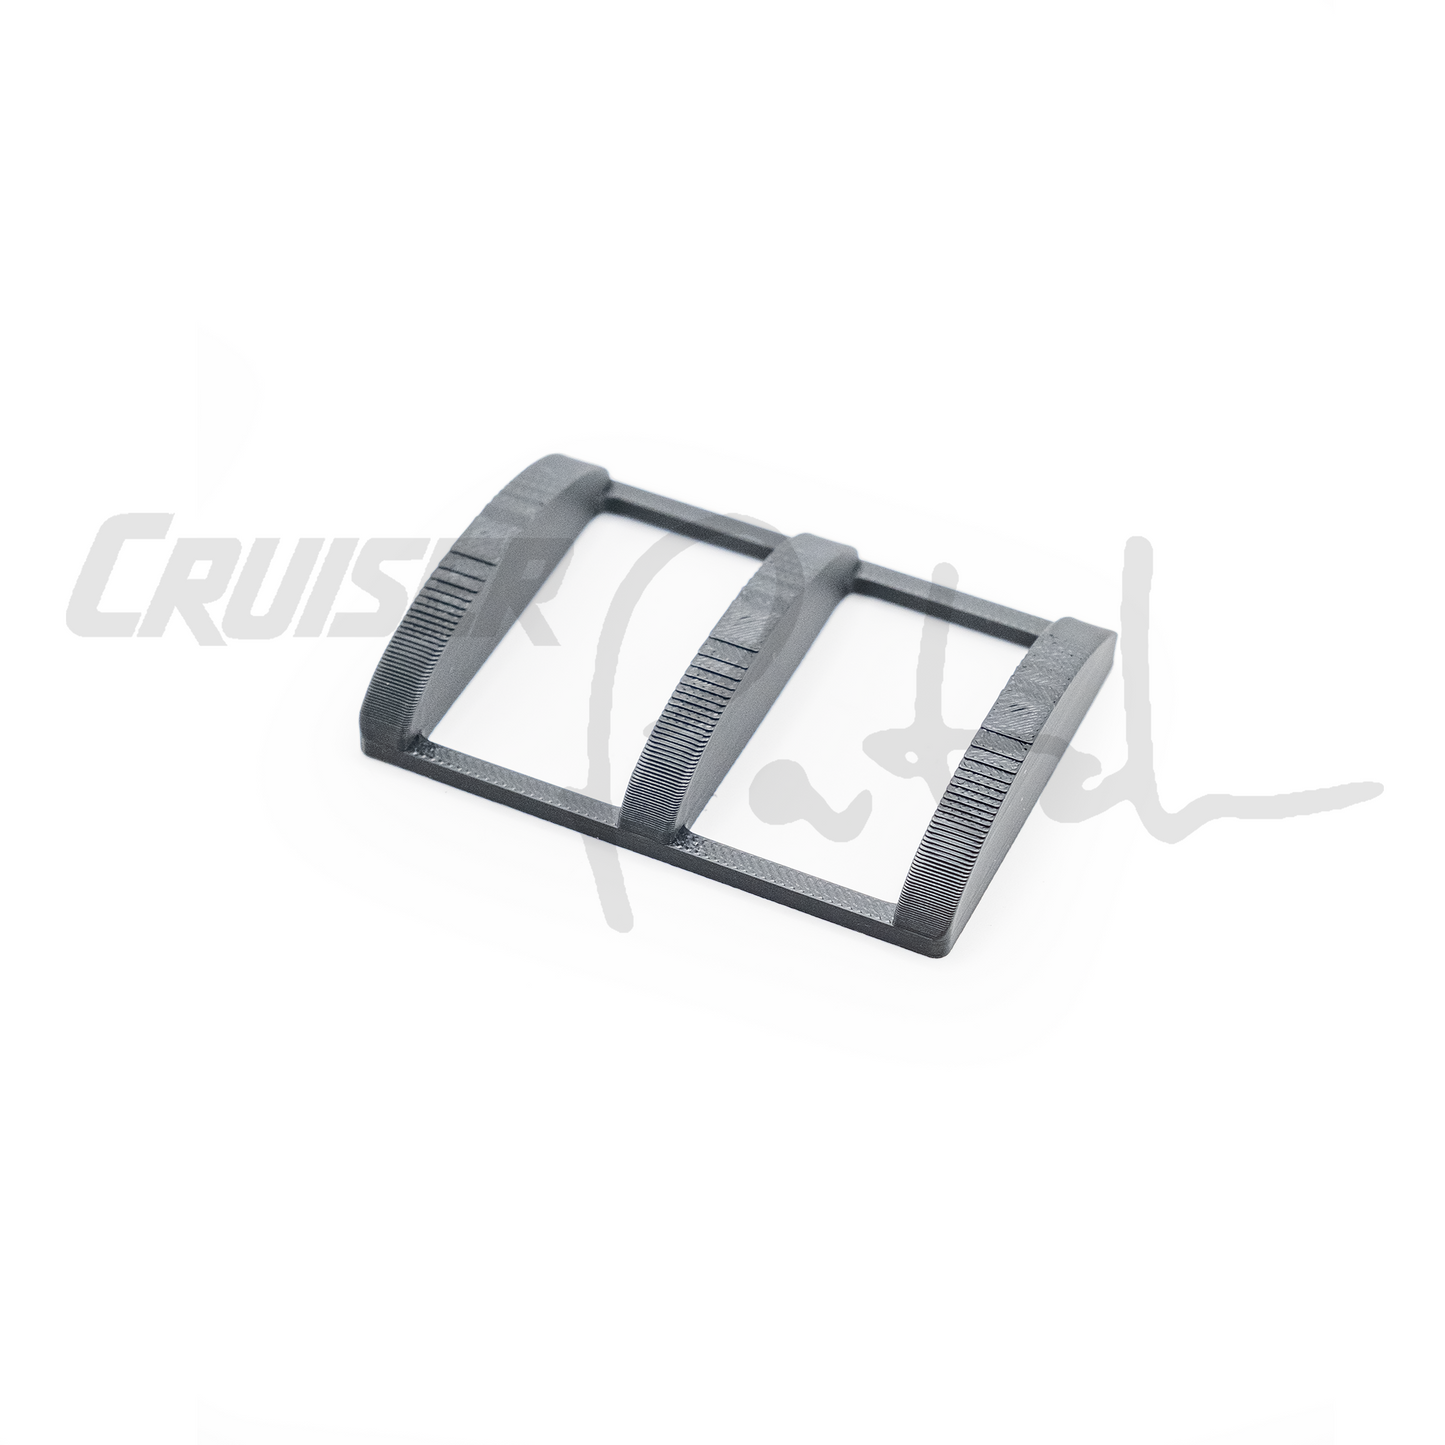 100 Series Seat Heater switch guards